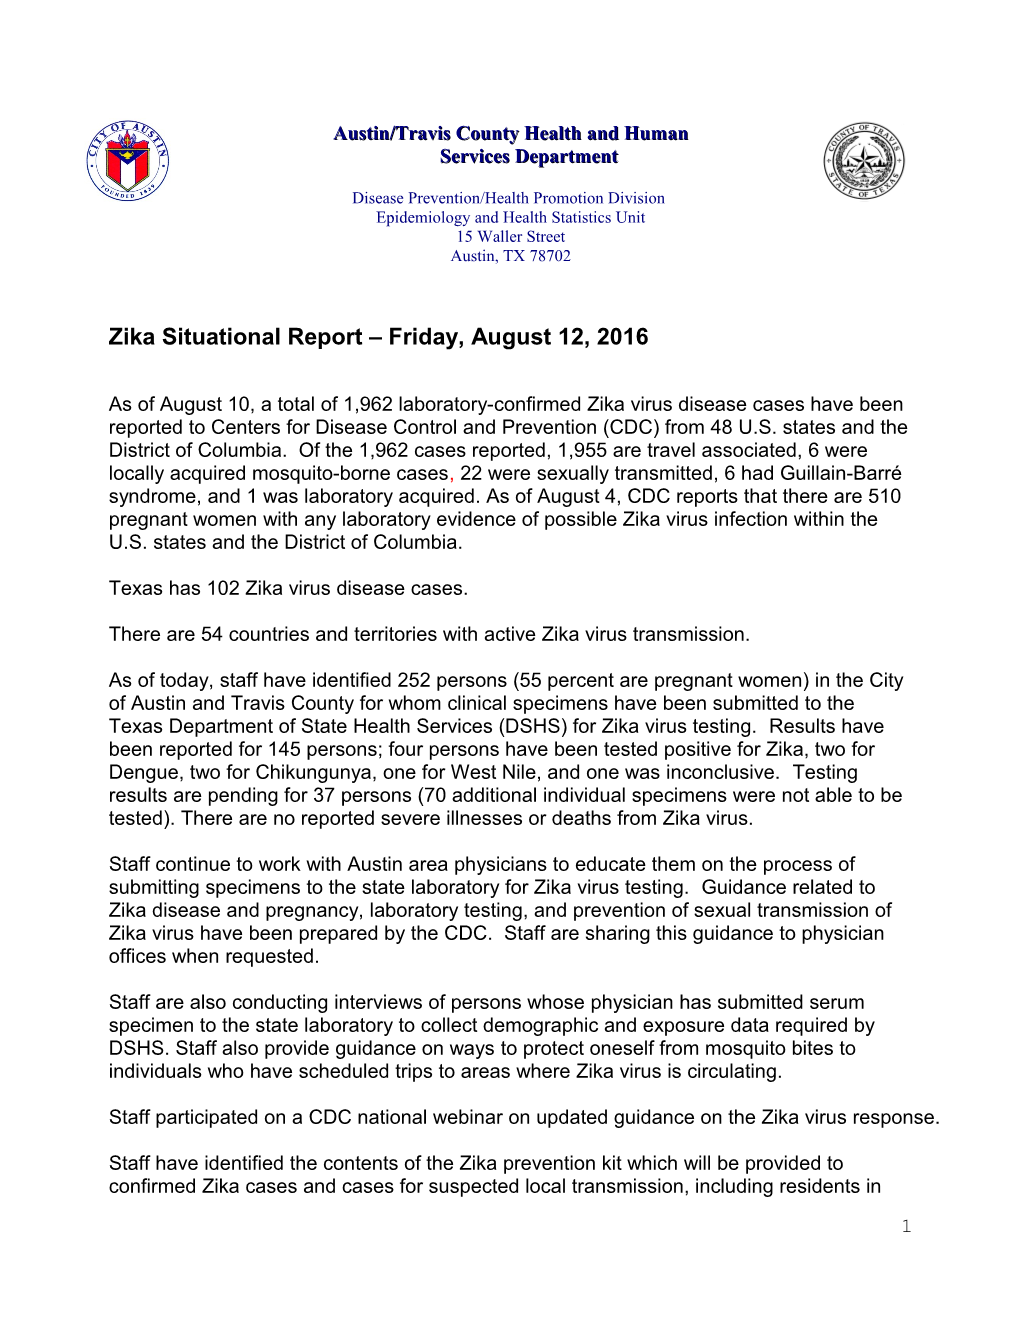 Zika Situational Report Friday, August 12, 2016